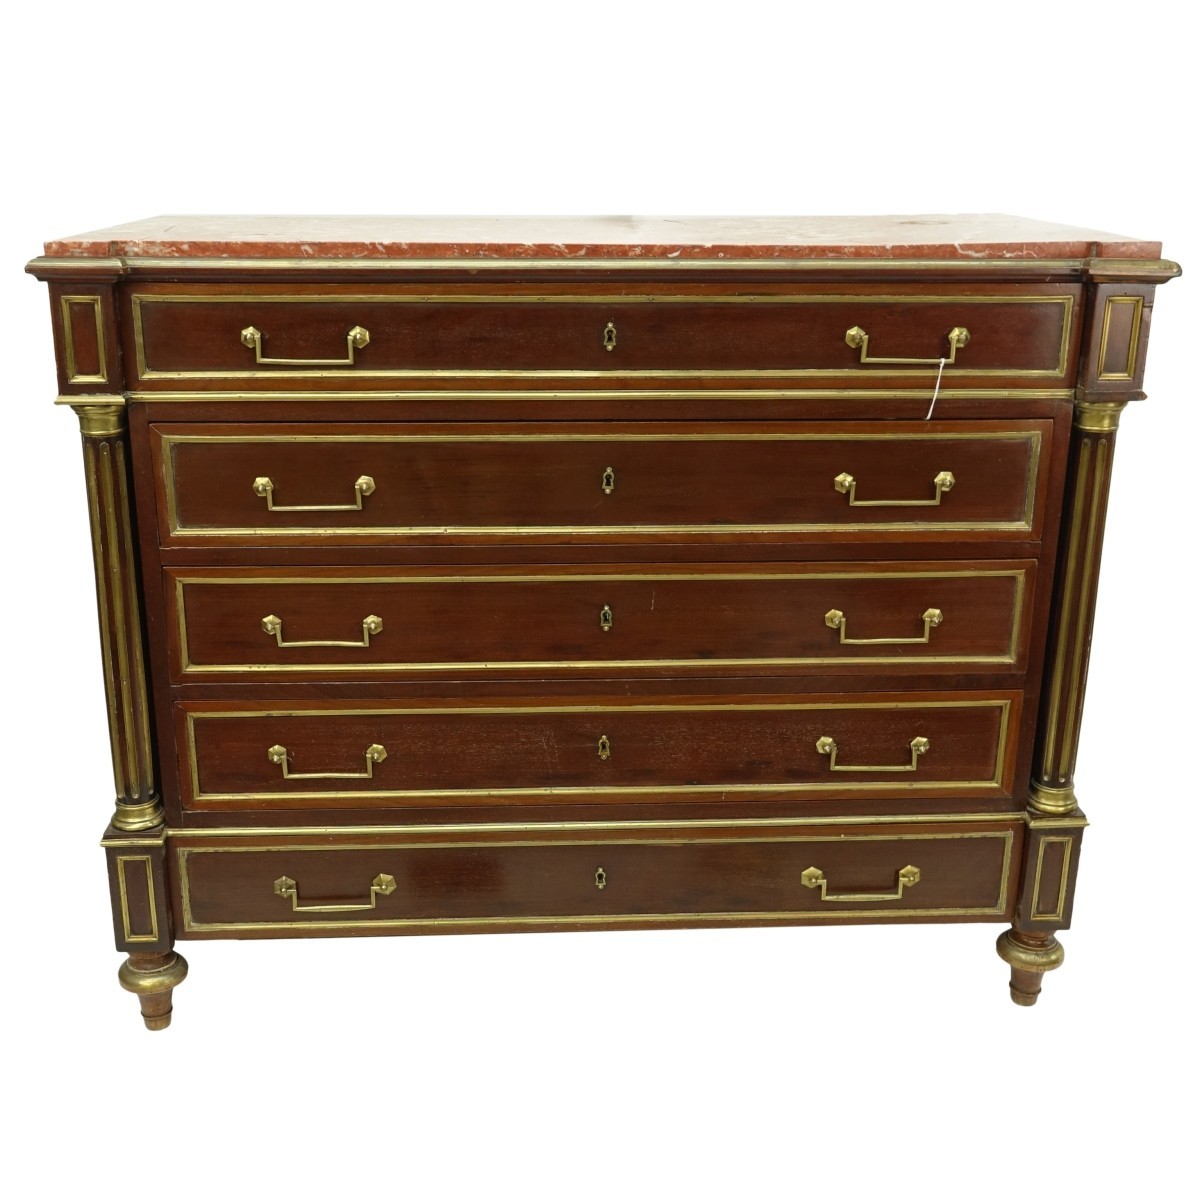 19C French Louis XVI Style Marble Top Commode